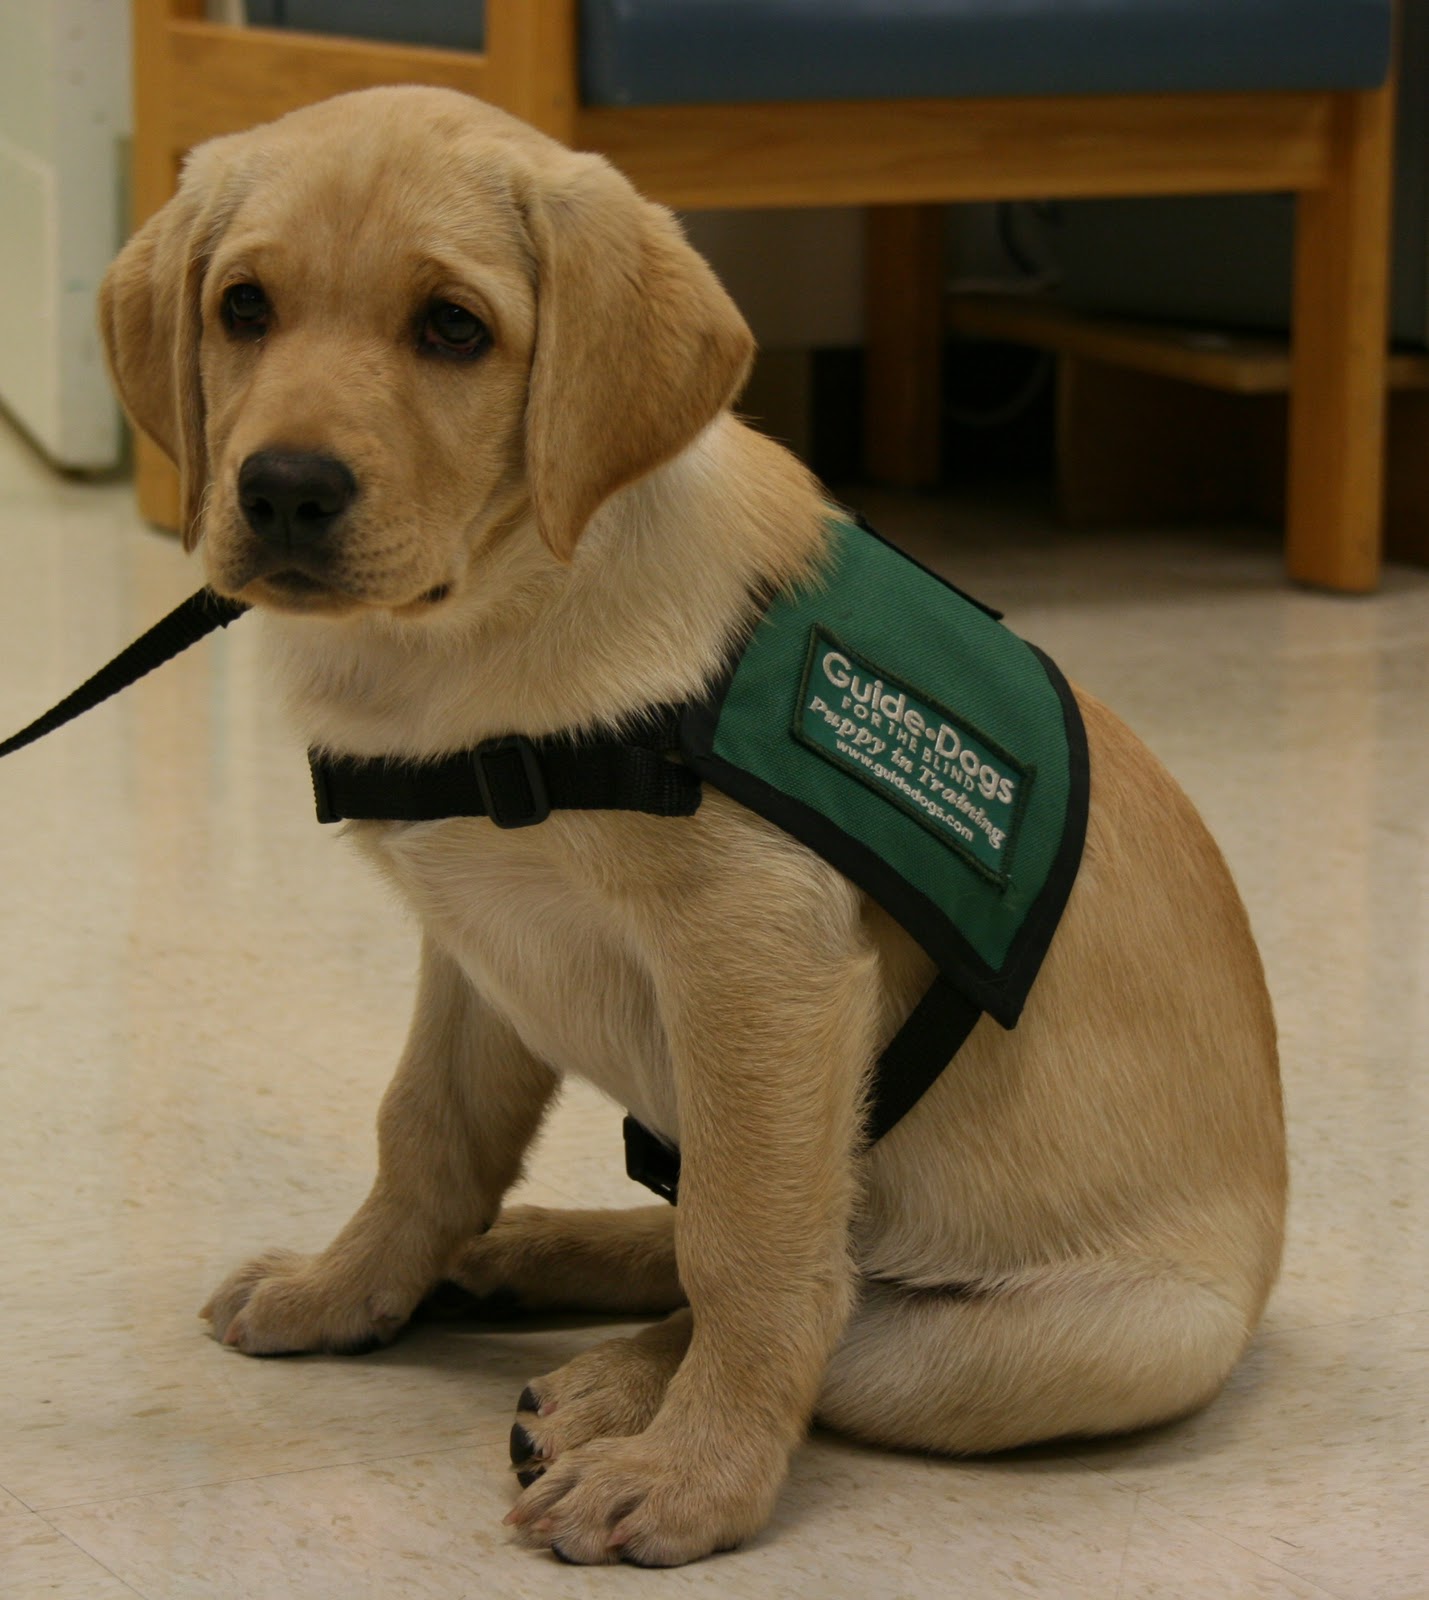 ... Rehabilitation Center: WBRC Welcomes New Guide Dog Puppy in Training